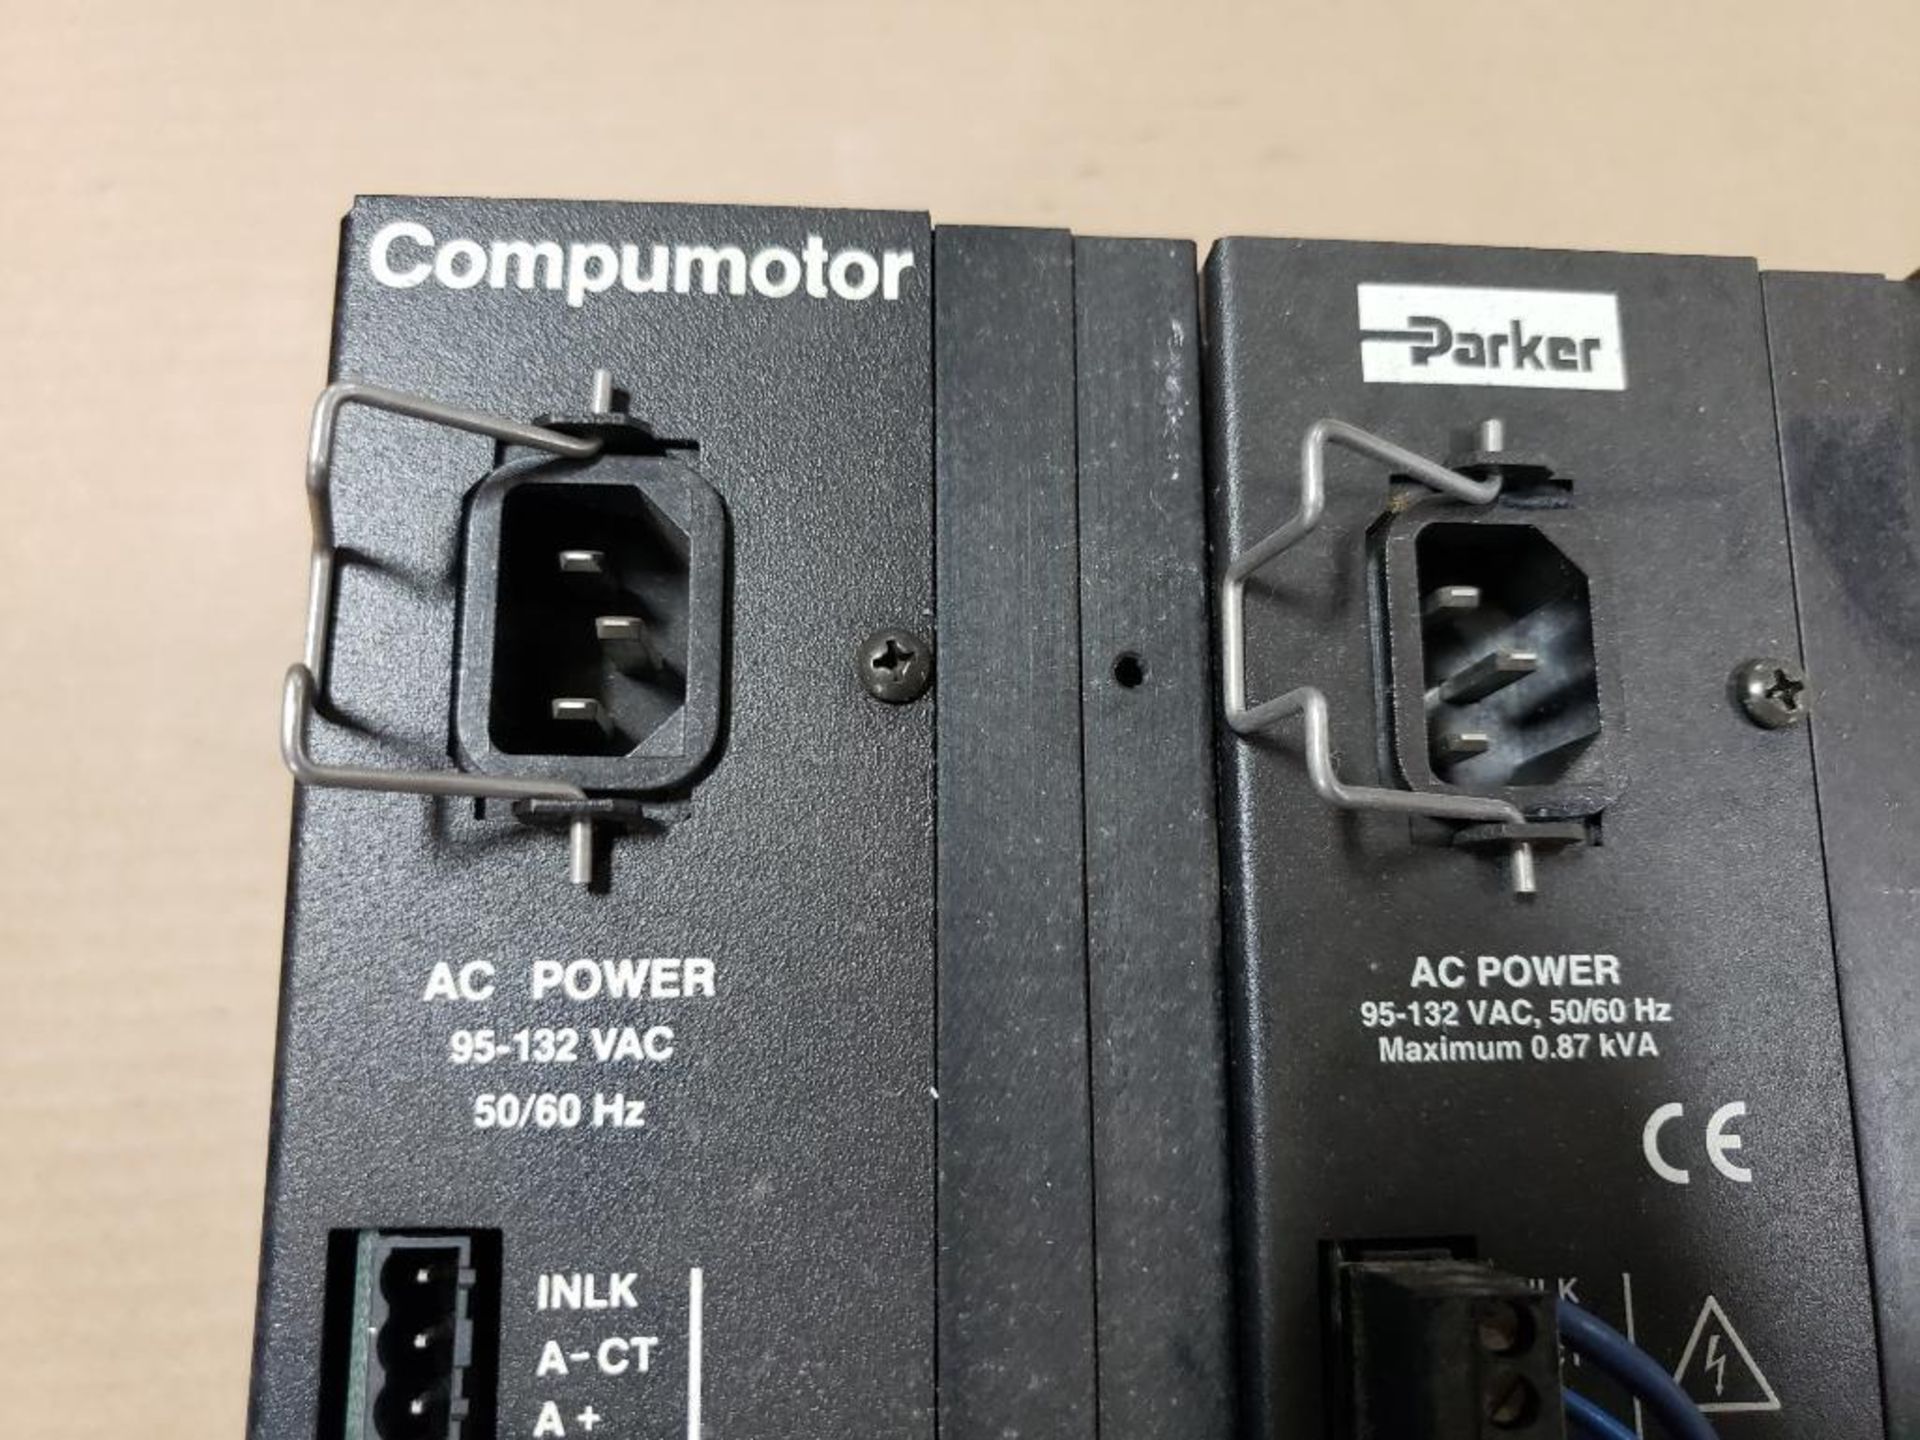 Qty 3 - Parker Compumotor Microstep drive. S-Series. S6-DRIVE. - Image 2 of 7